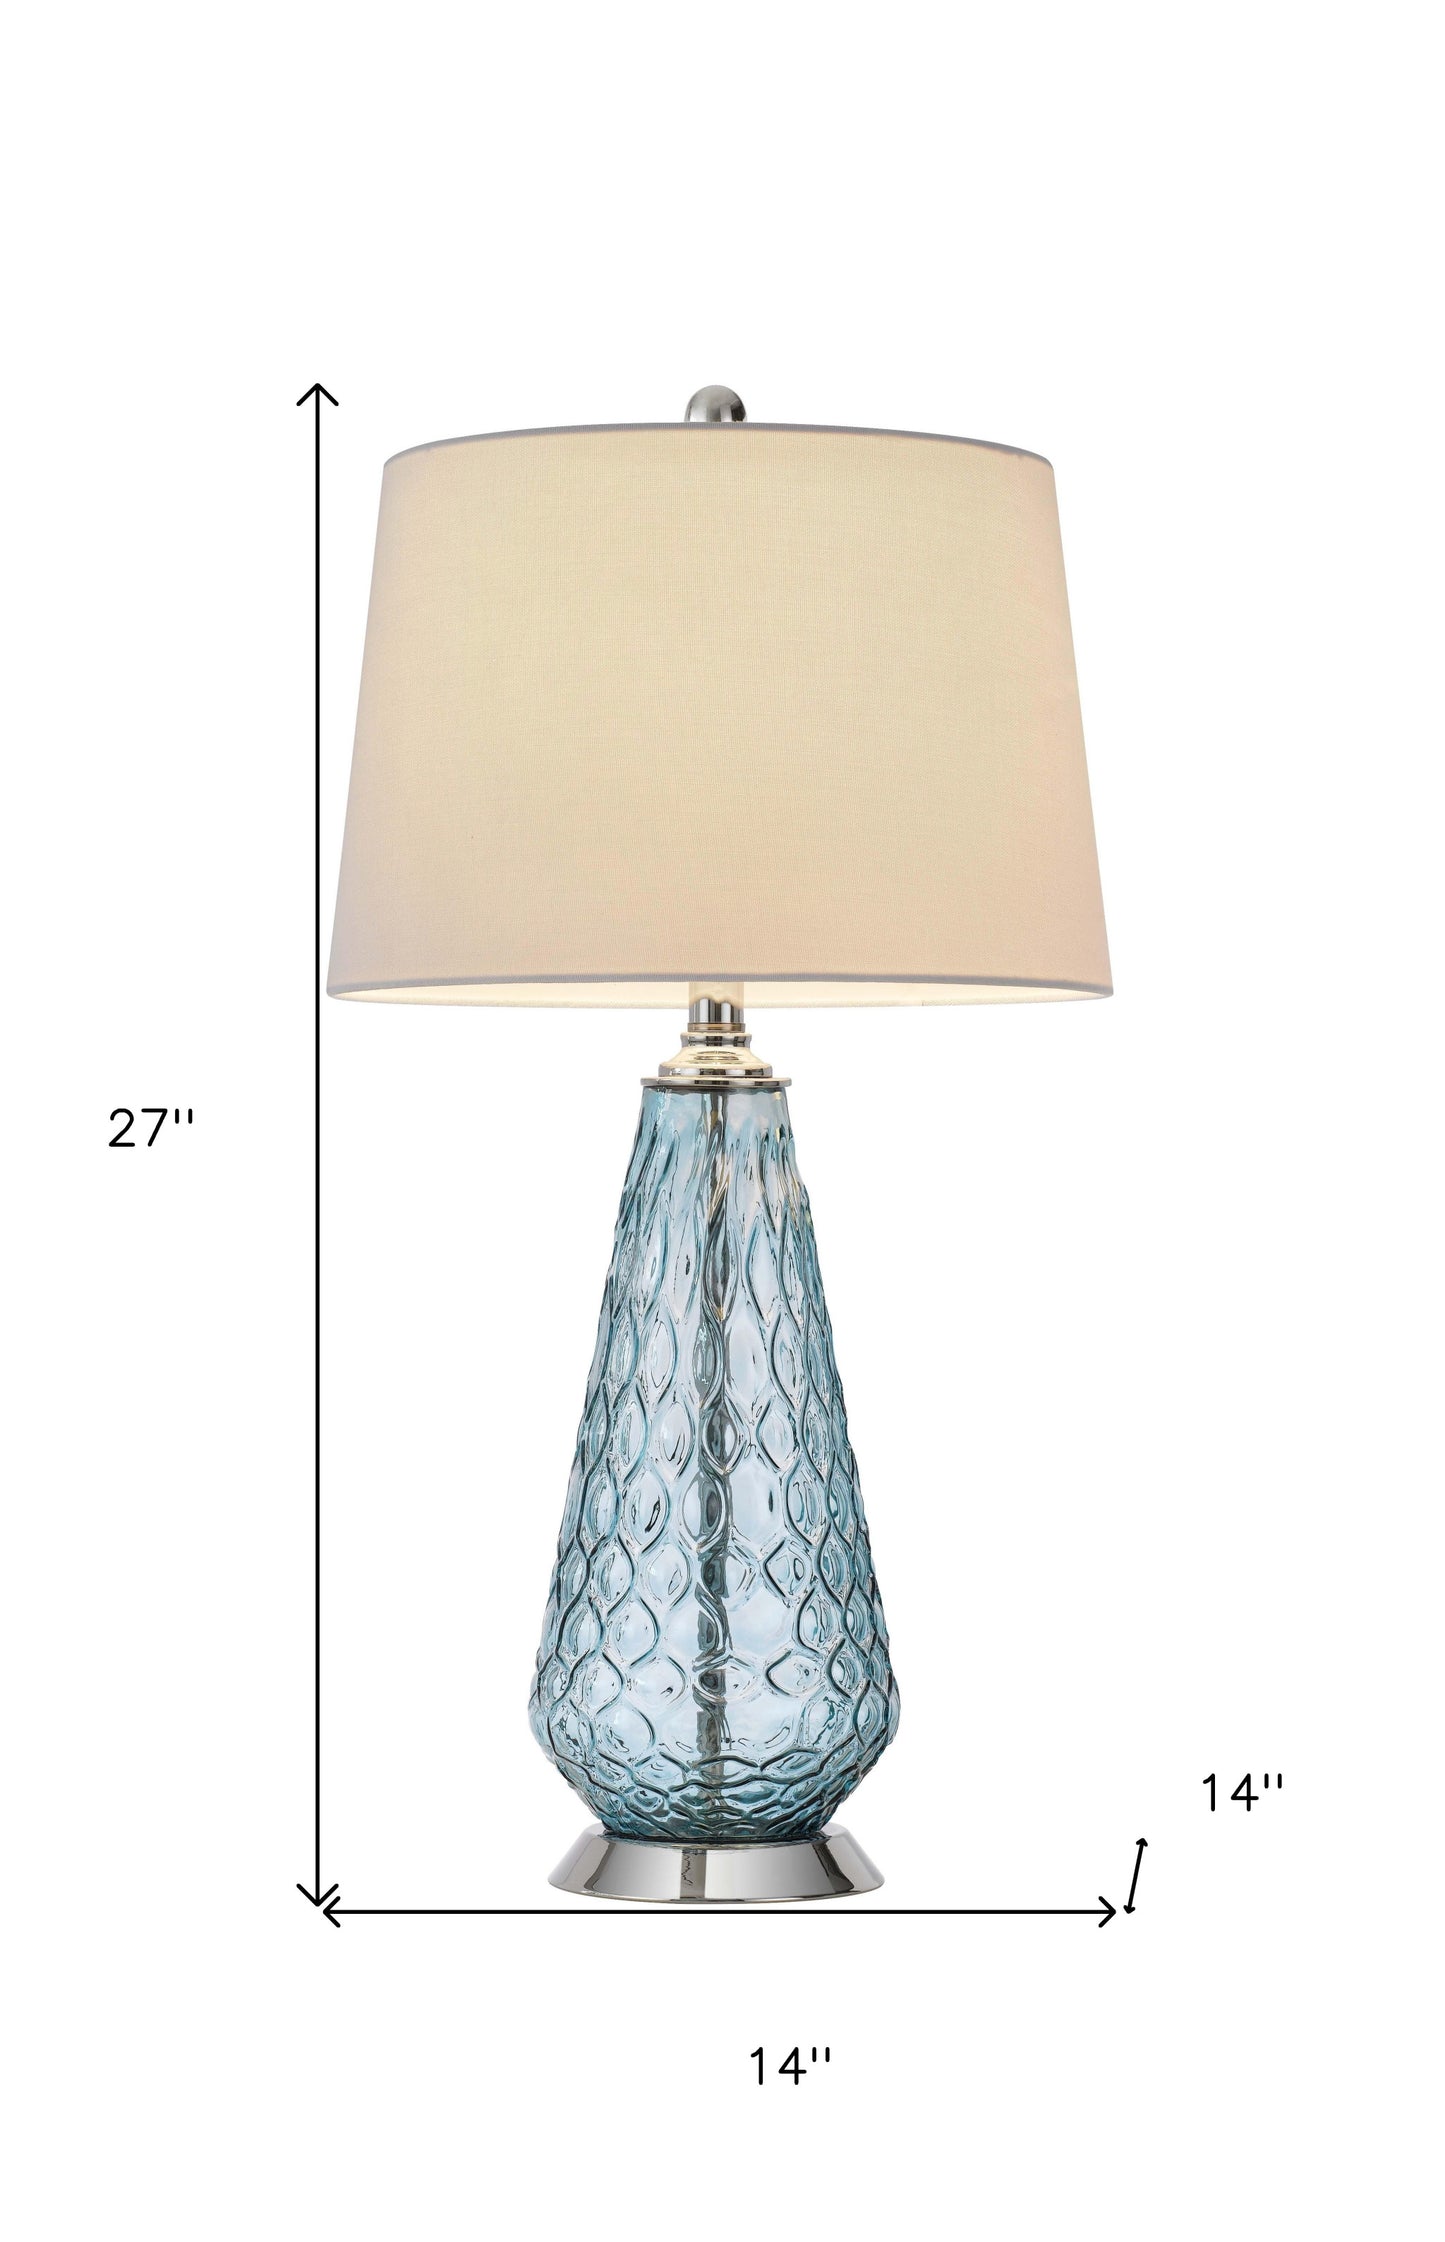 27" Aqua Glass Table Lamp With White Empire Shade